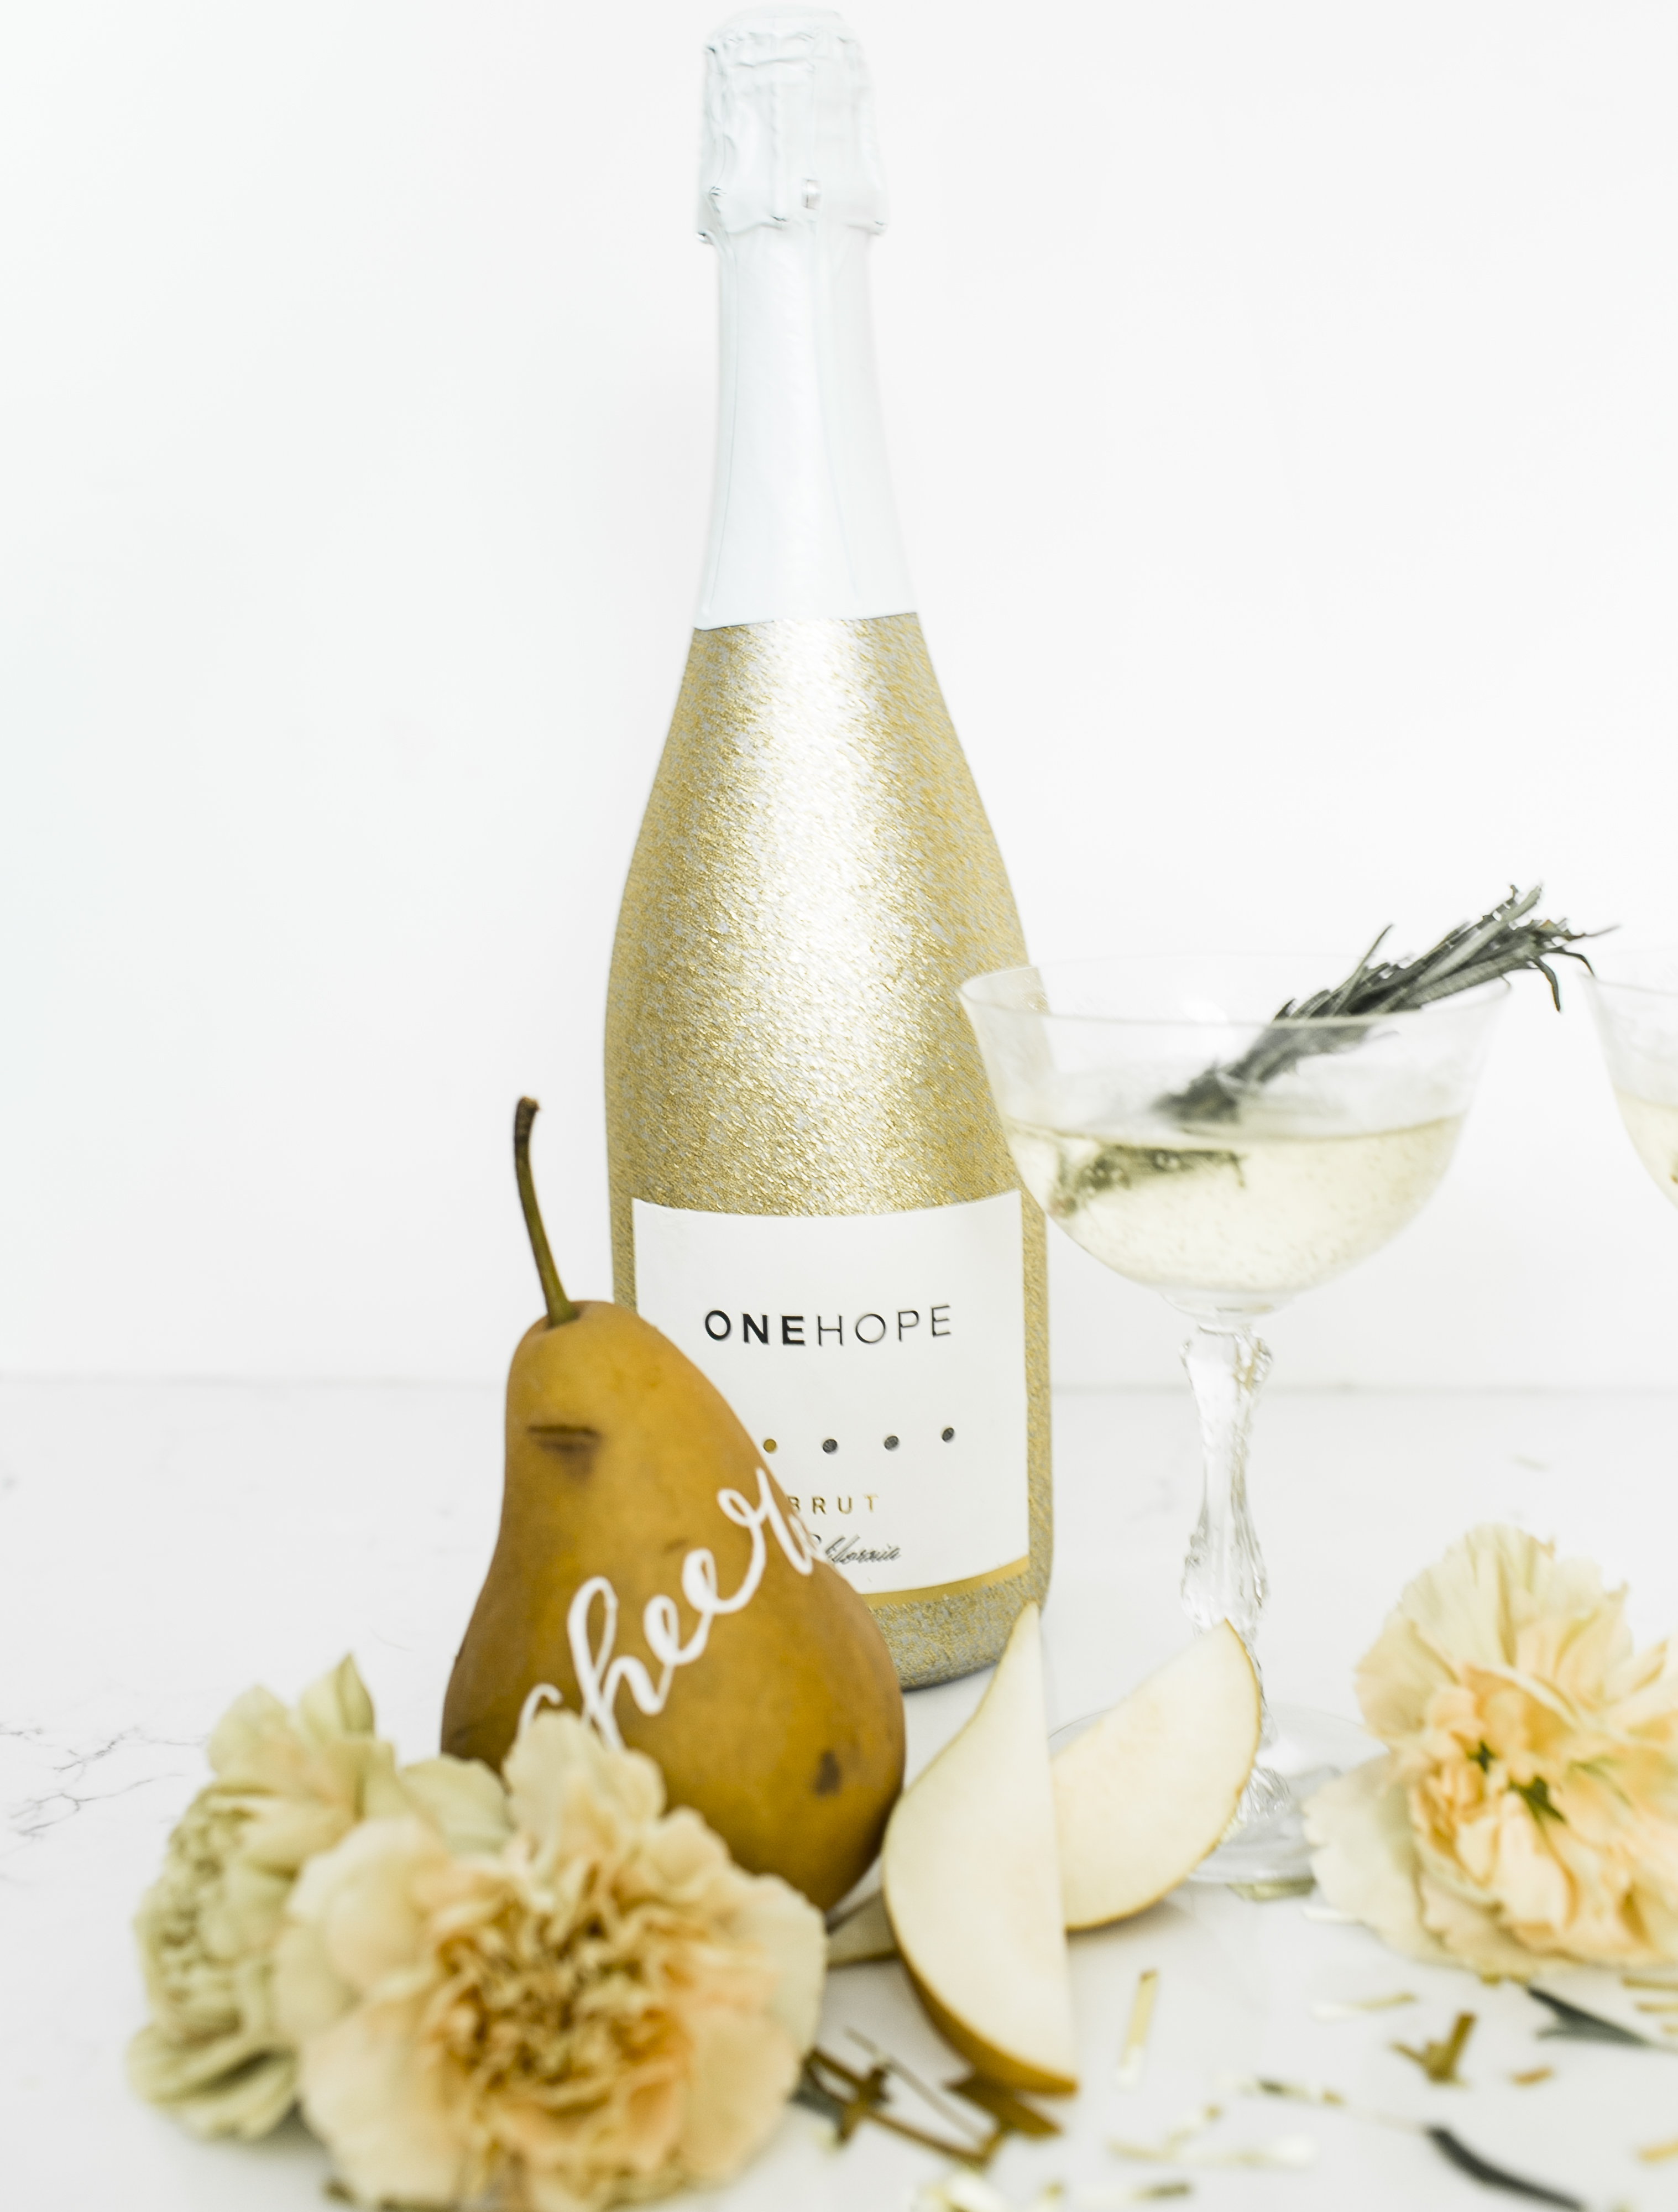 Cheers to the New Year with some Pears & Bubbly!